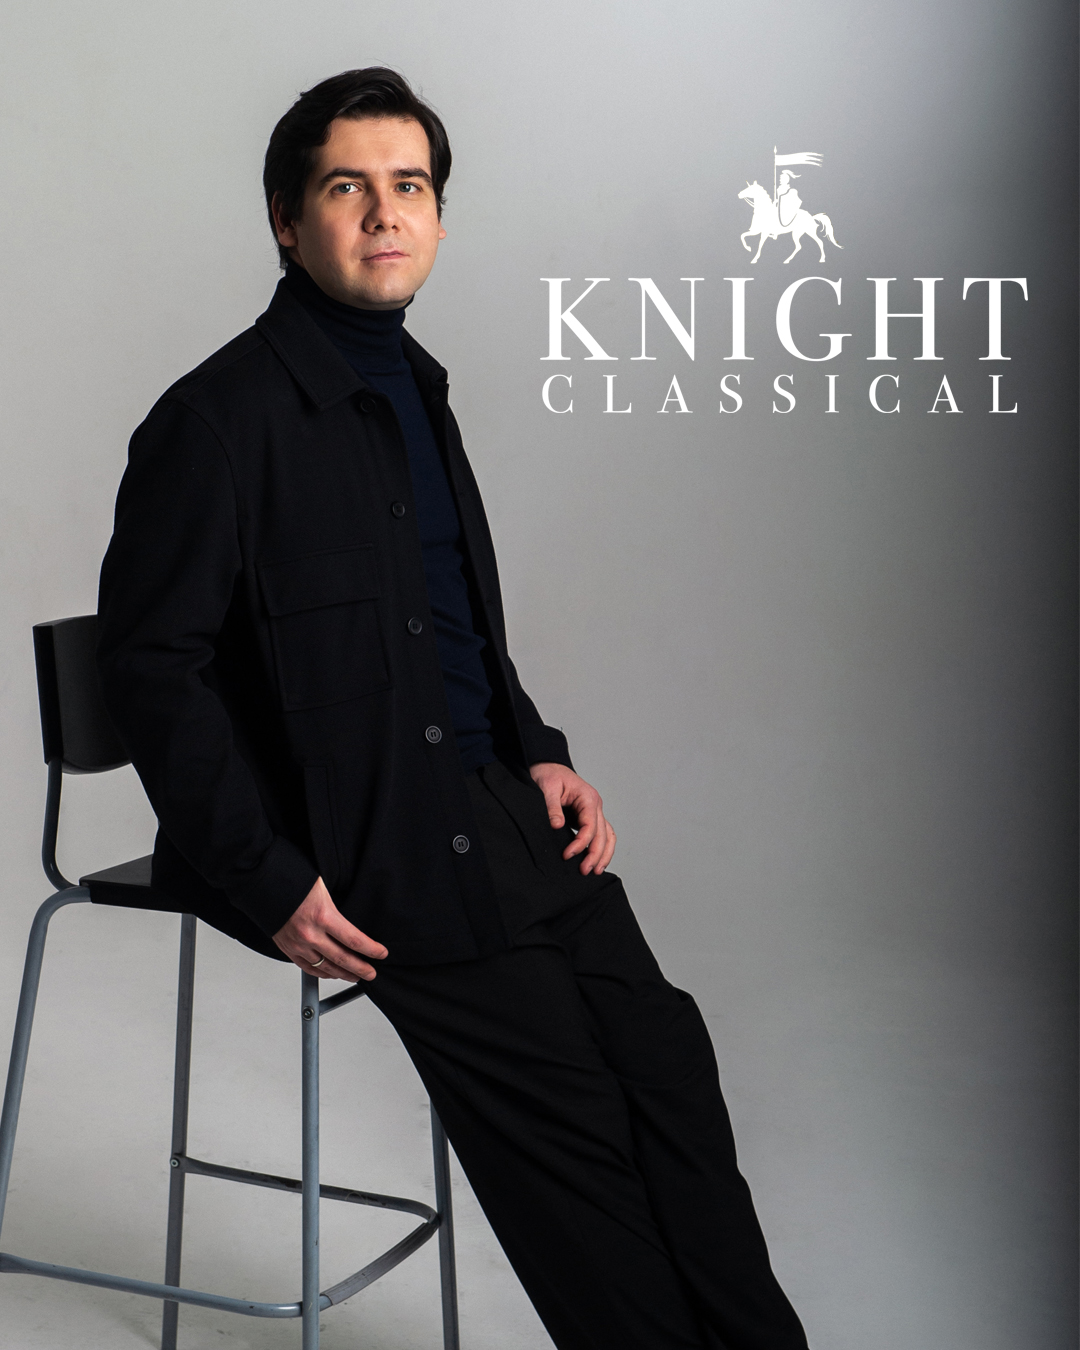 Vadym Kholodenko joins Knight Classical for General Management